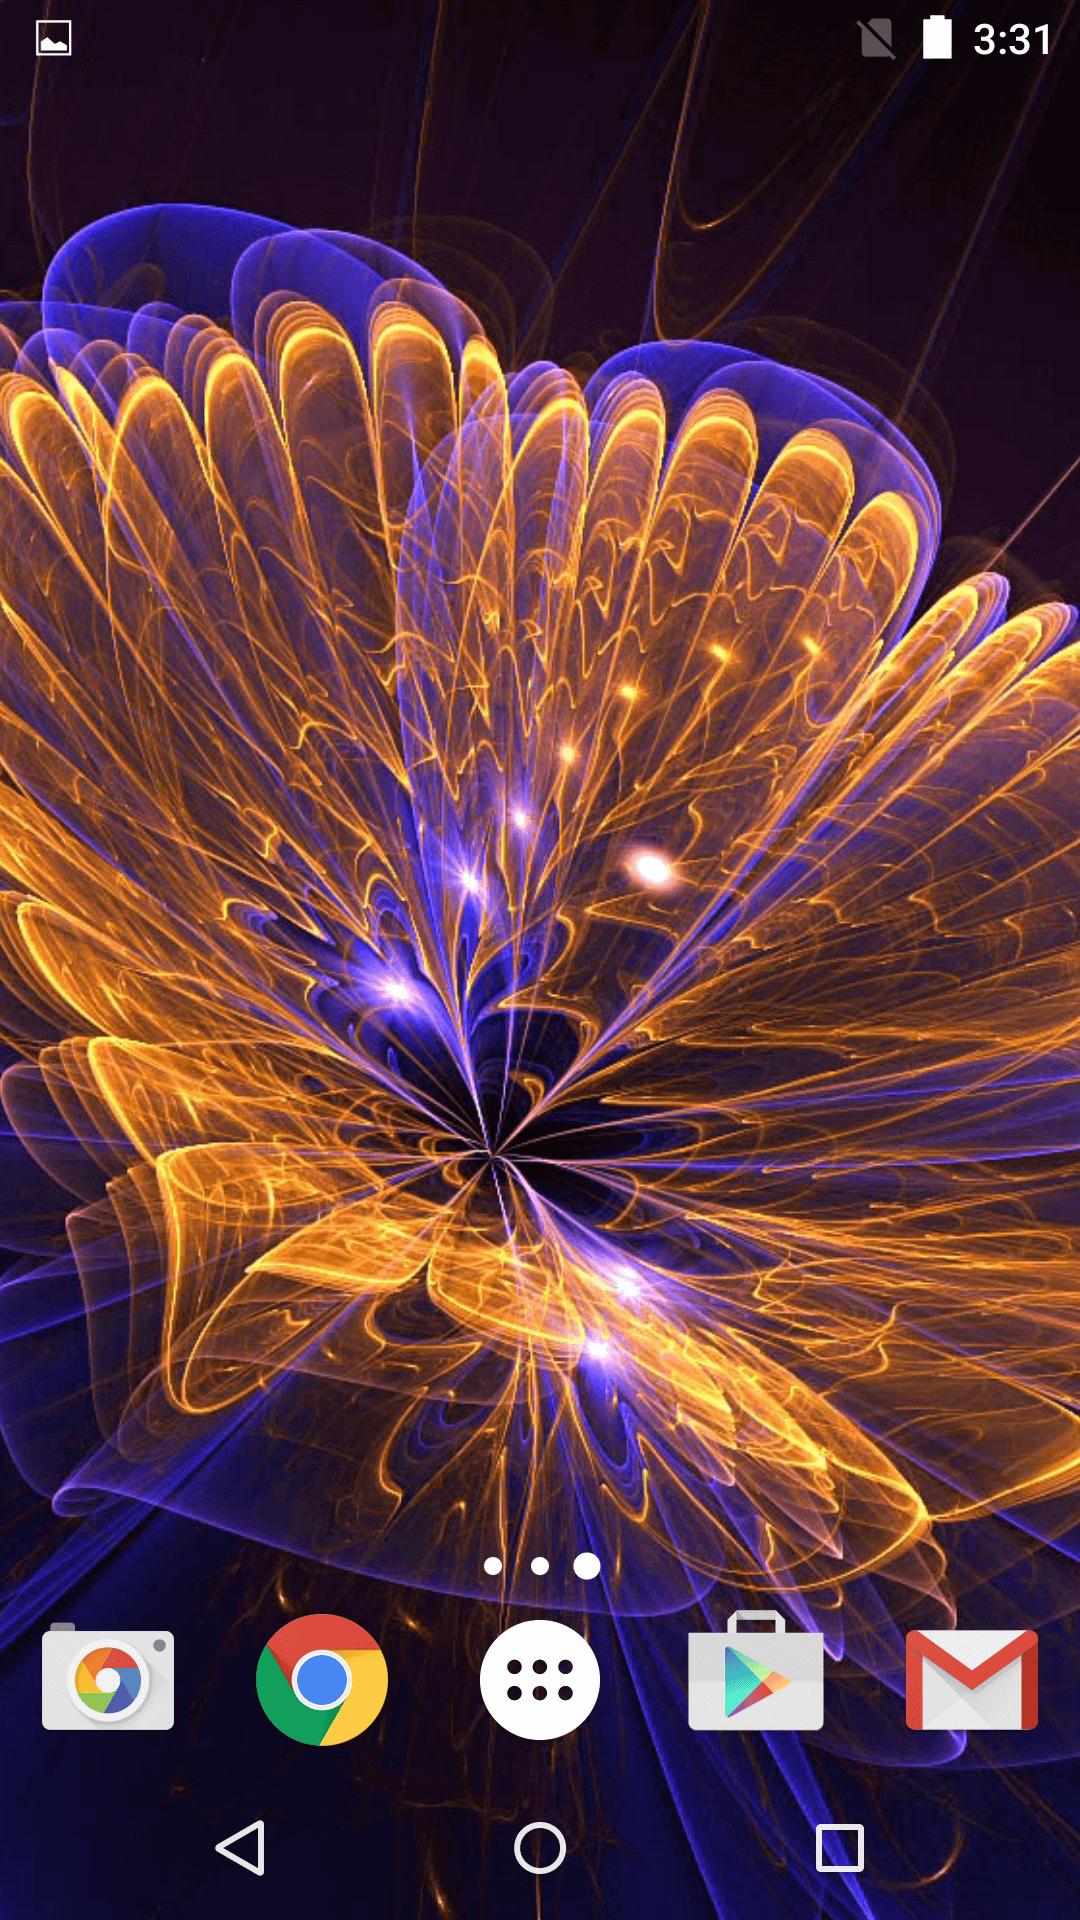 glowing flowers live wallpaper,light,technology,neon,electric blue,games